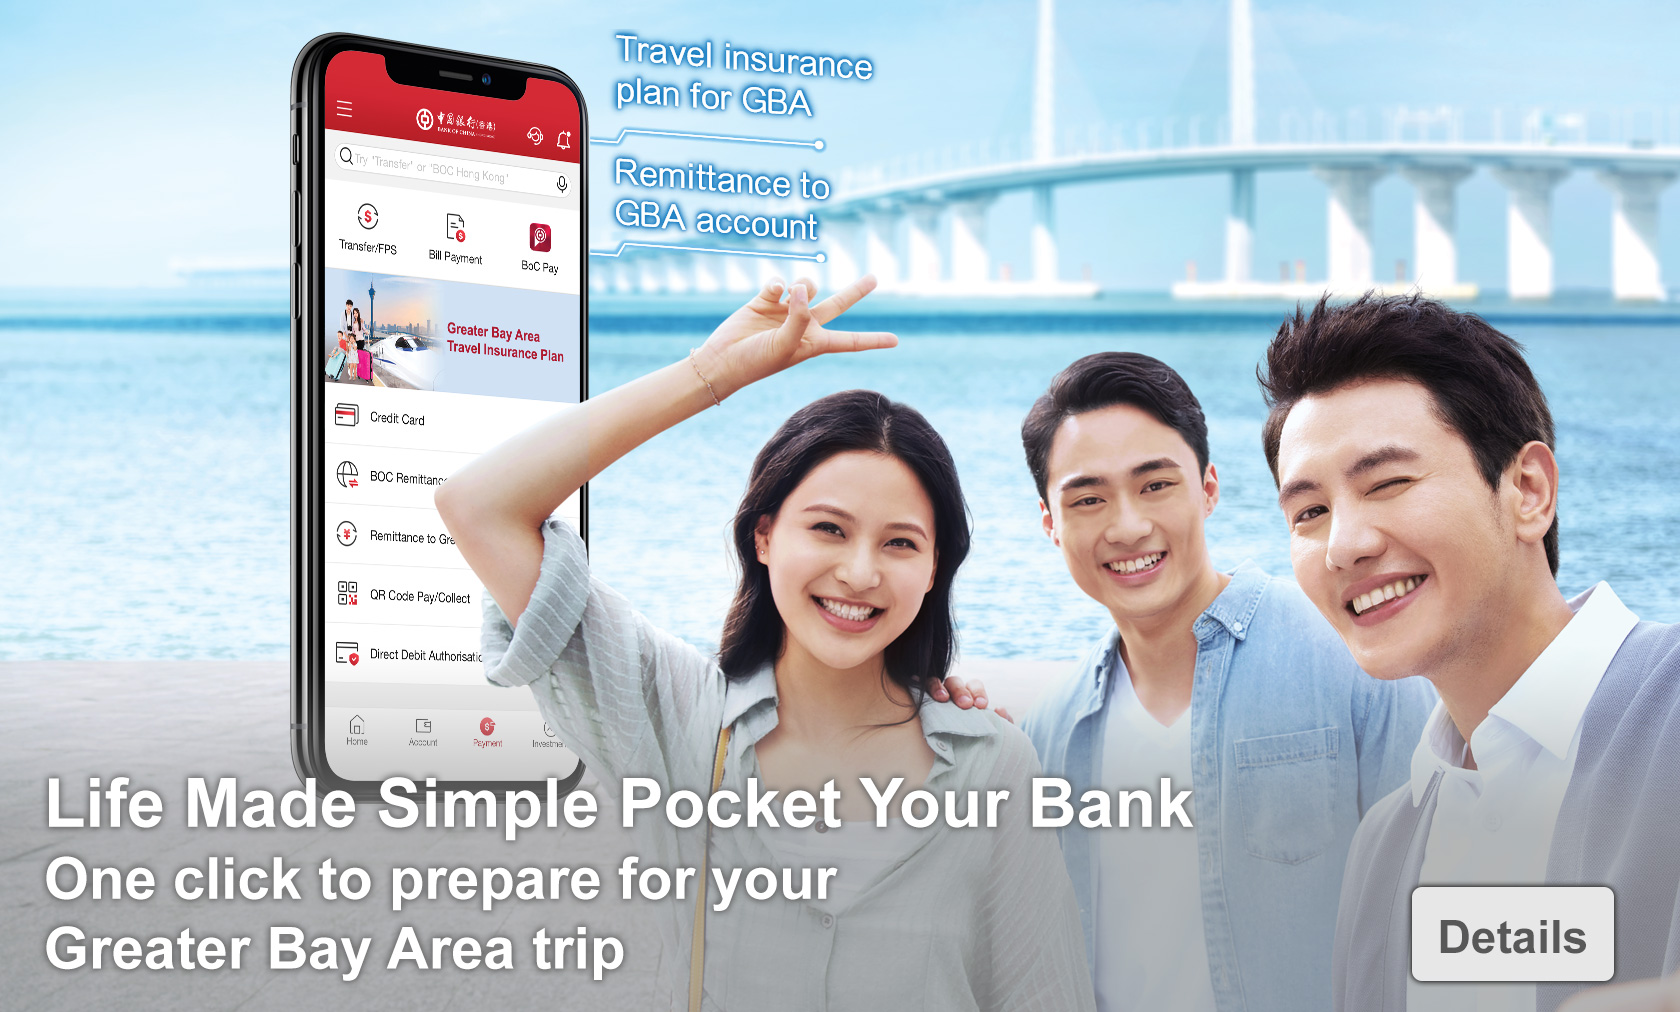 Life Made Simple Pocket Your Bank
         One click to prepare for your Greater Bay Area trip